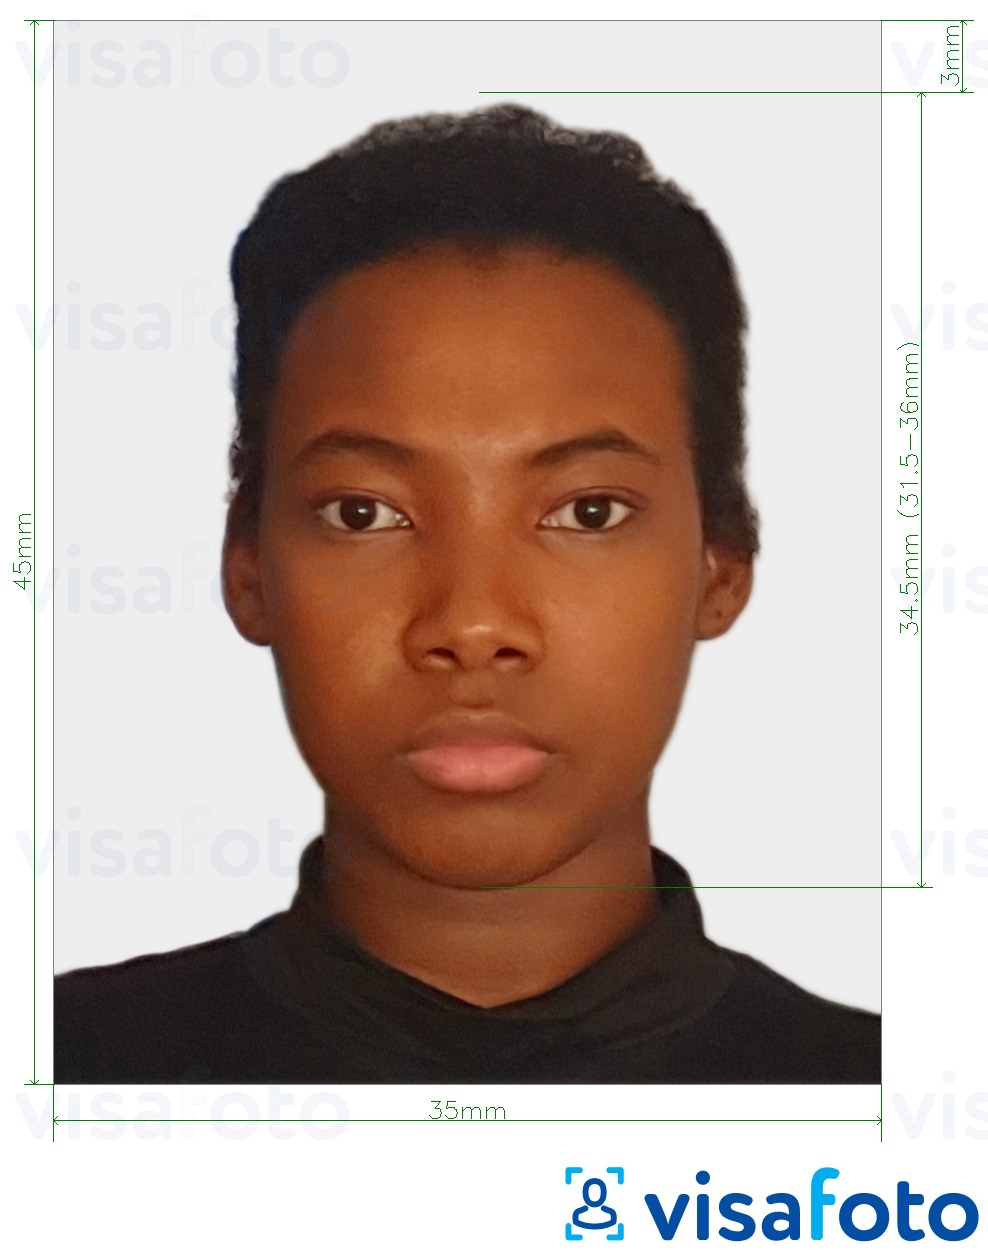 Example of photo for South Africa Visa 35x45 mm (3.5x4.5 cm) with exact size specification